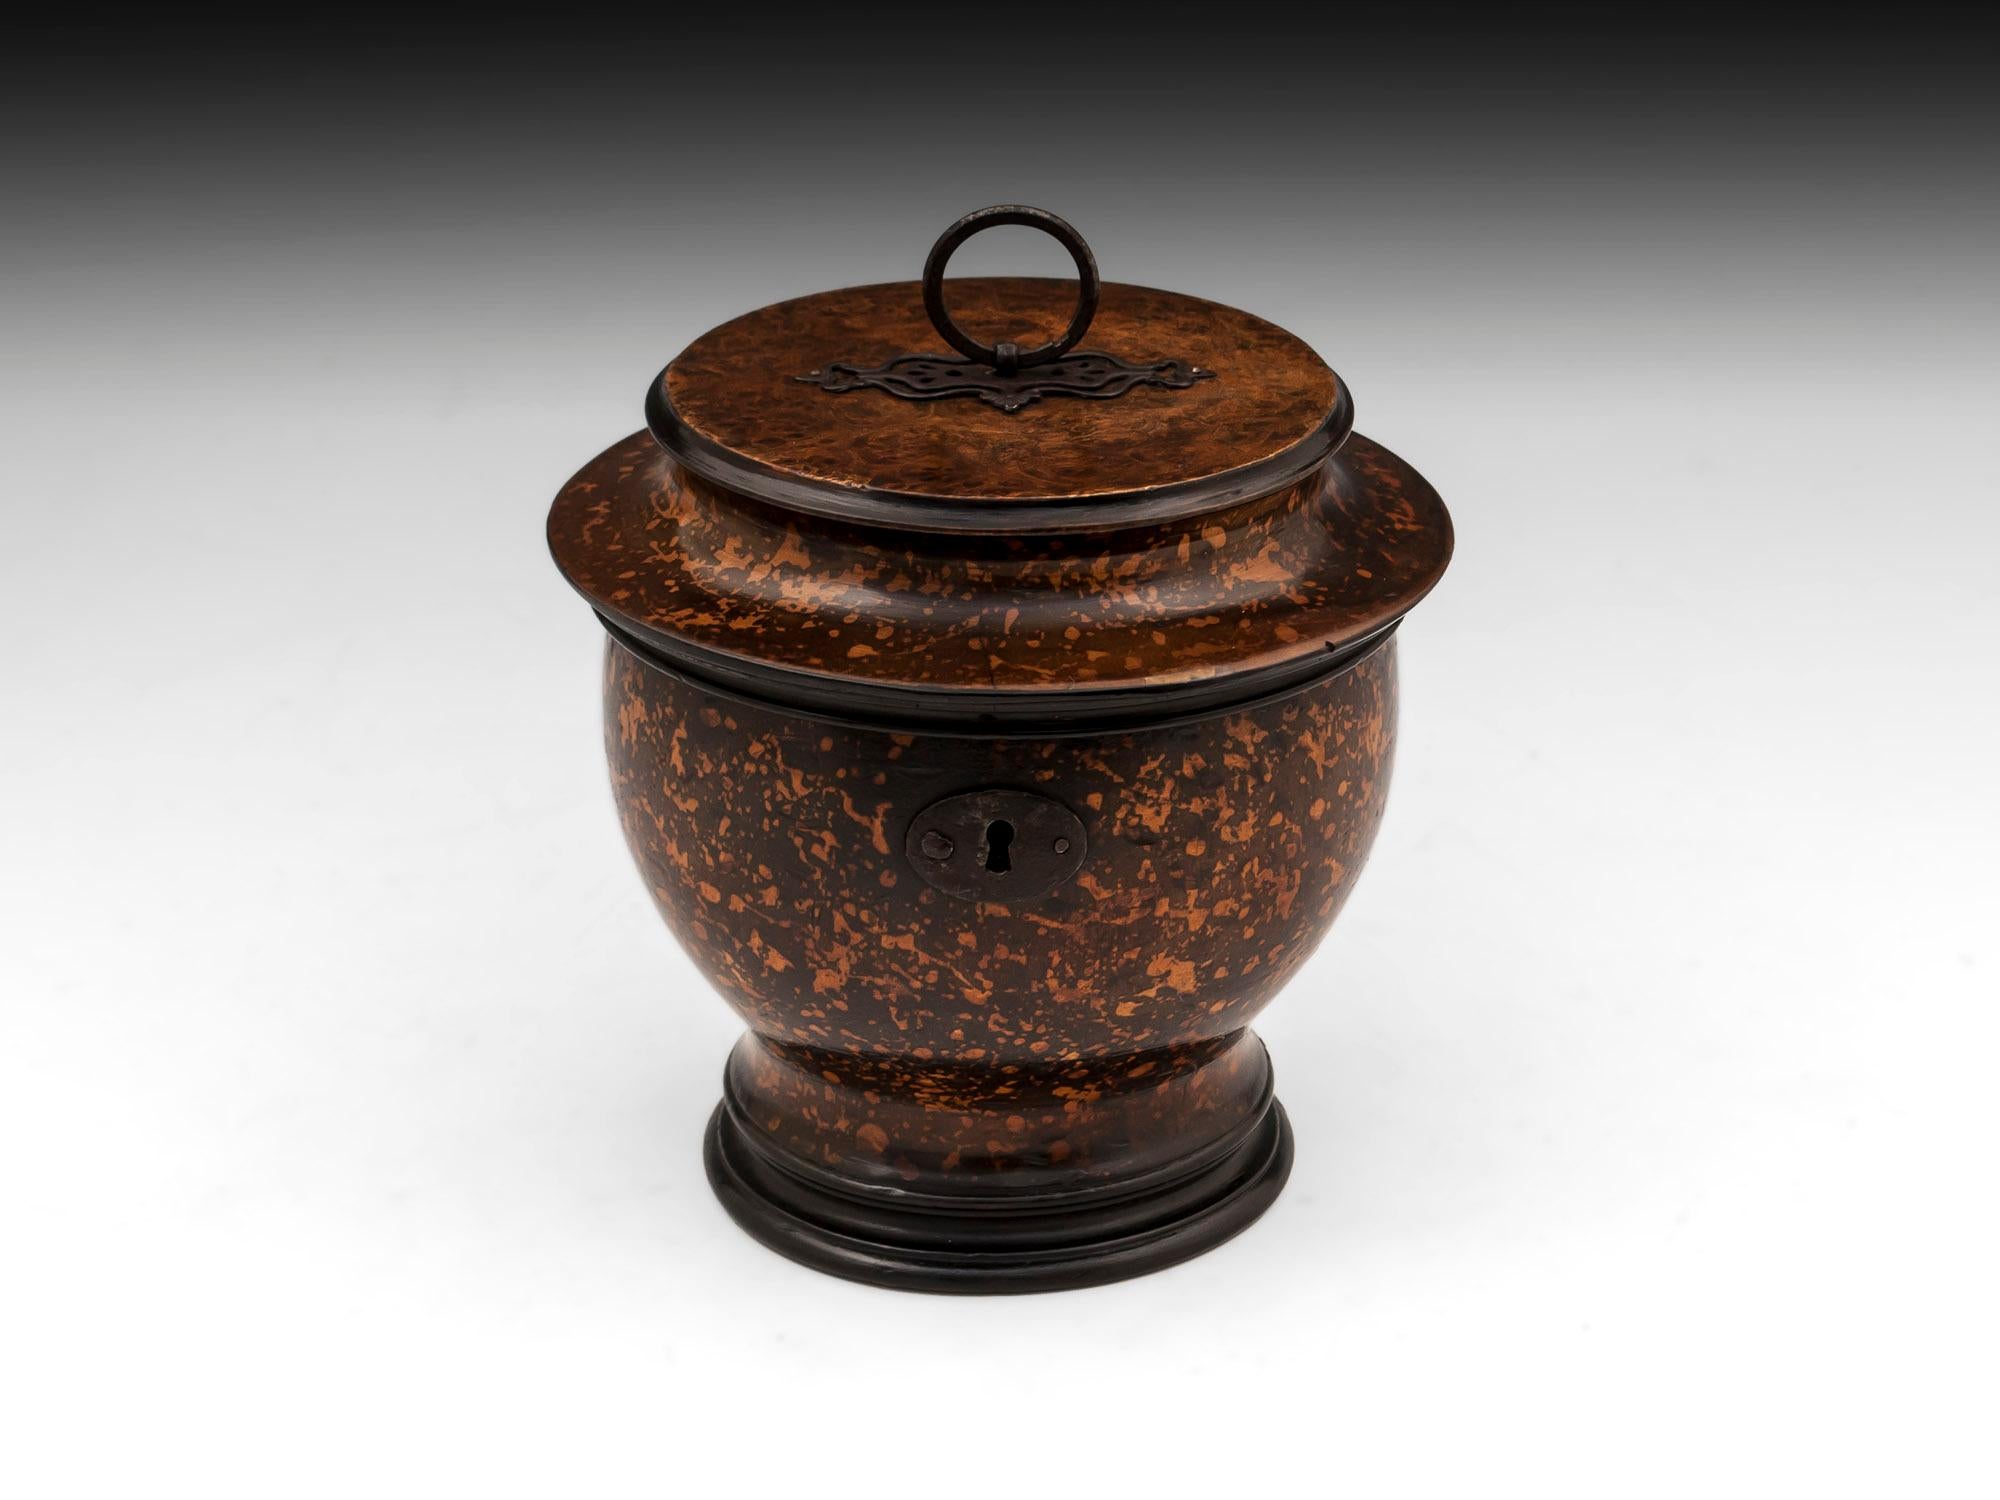 Antique wooden turned urn shaped tea caddy with wonderful dark green mottled decoration similar to the Melon fruit tea caddies. The top is has a tight bur and has ornate cut steel back plate and handle, with the front having a oval escutcheon

The